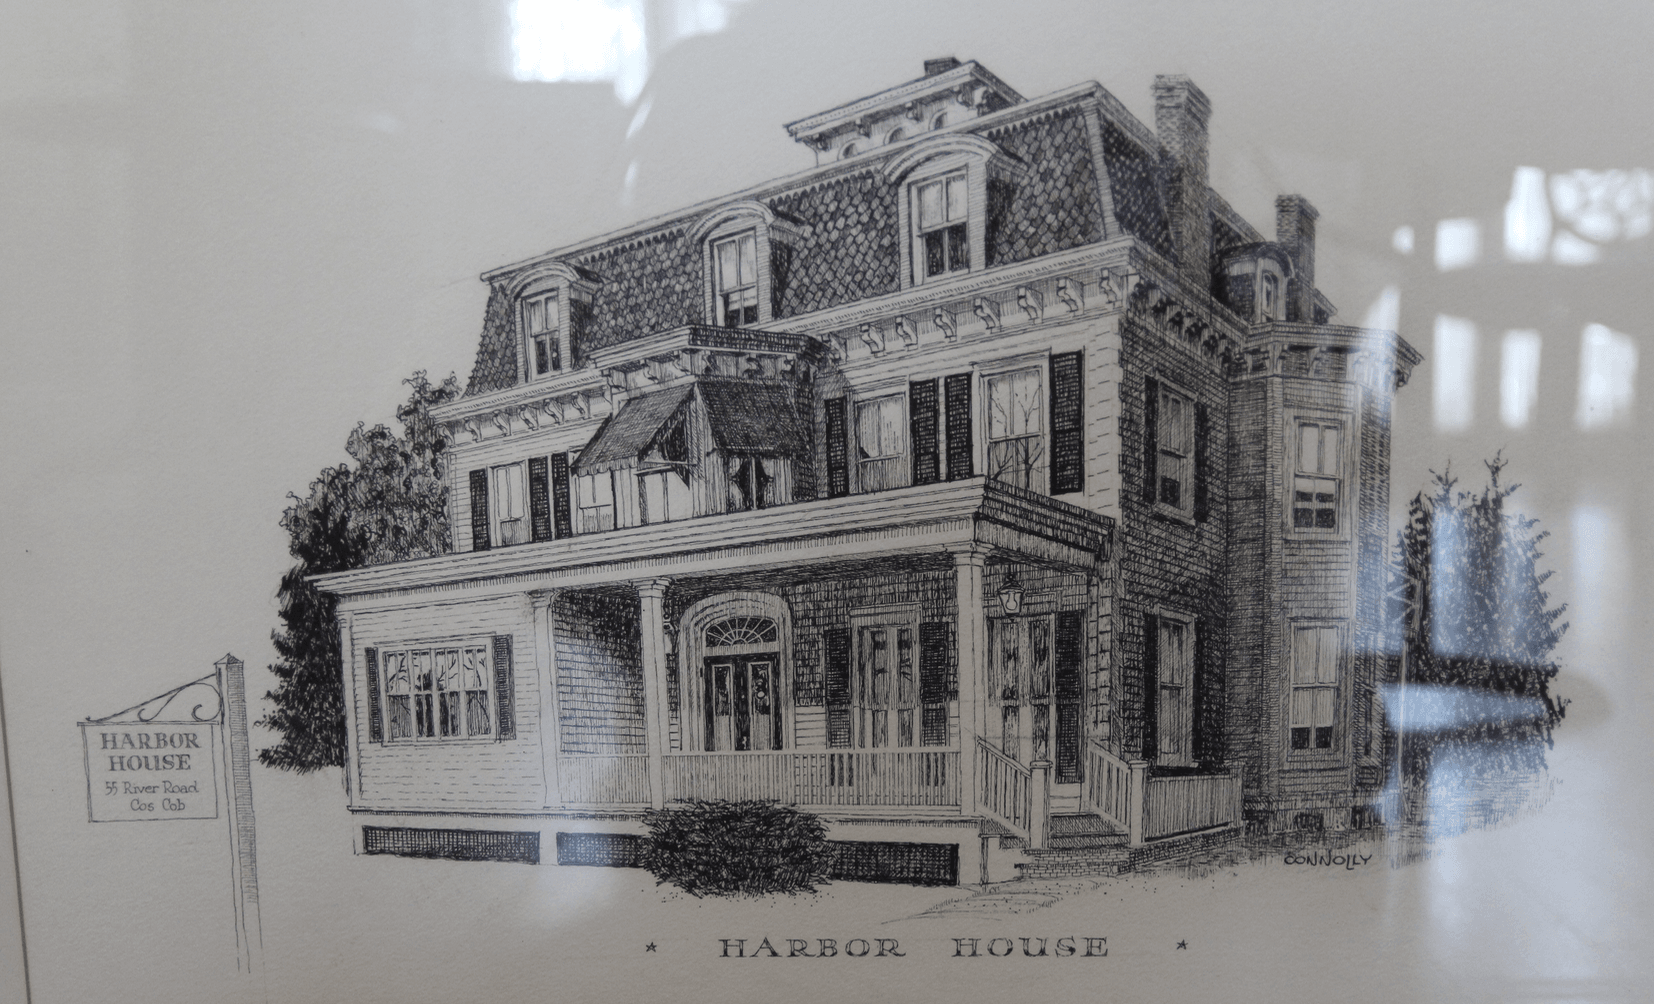 Vintage illustration of "Harbor House" in Cos Cob